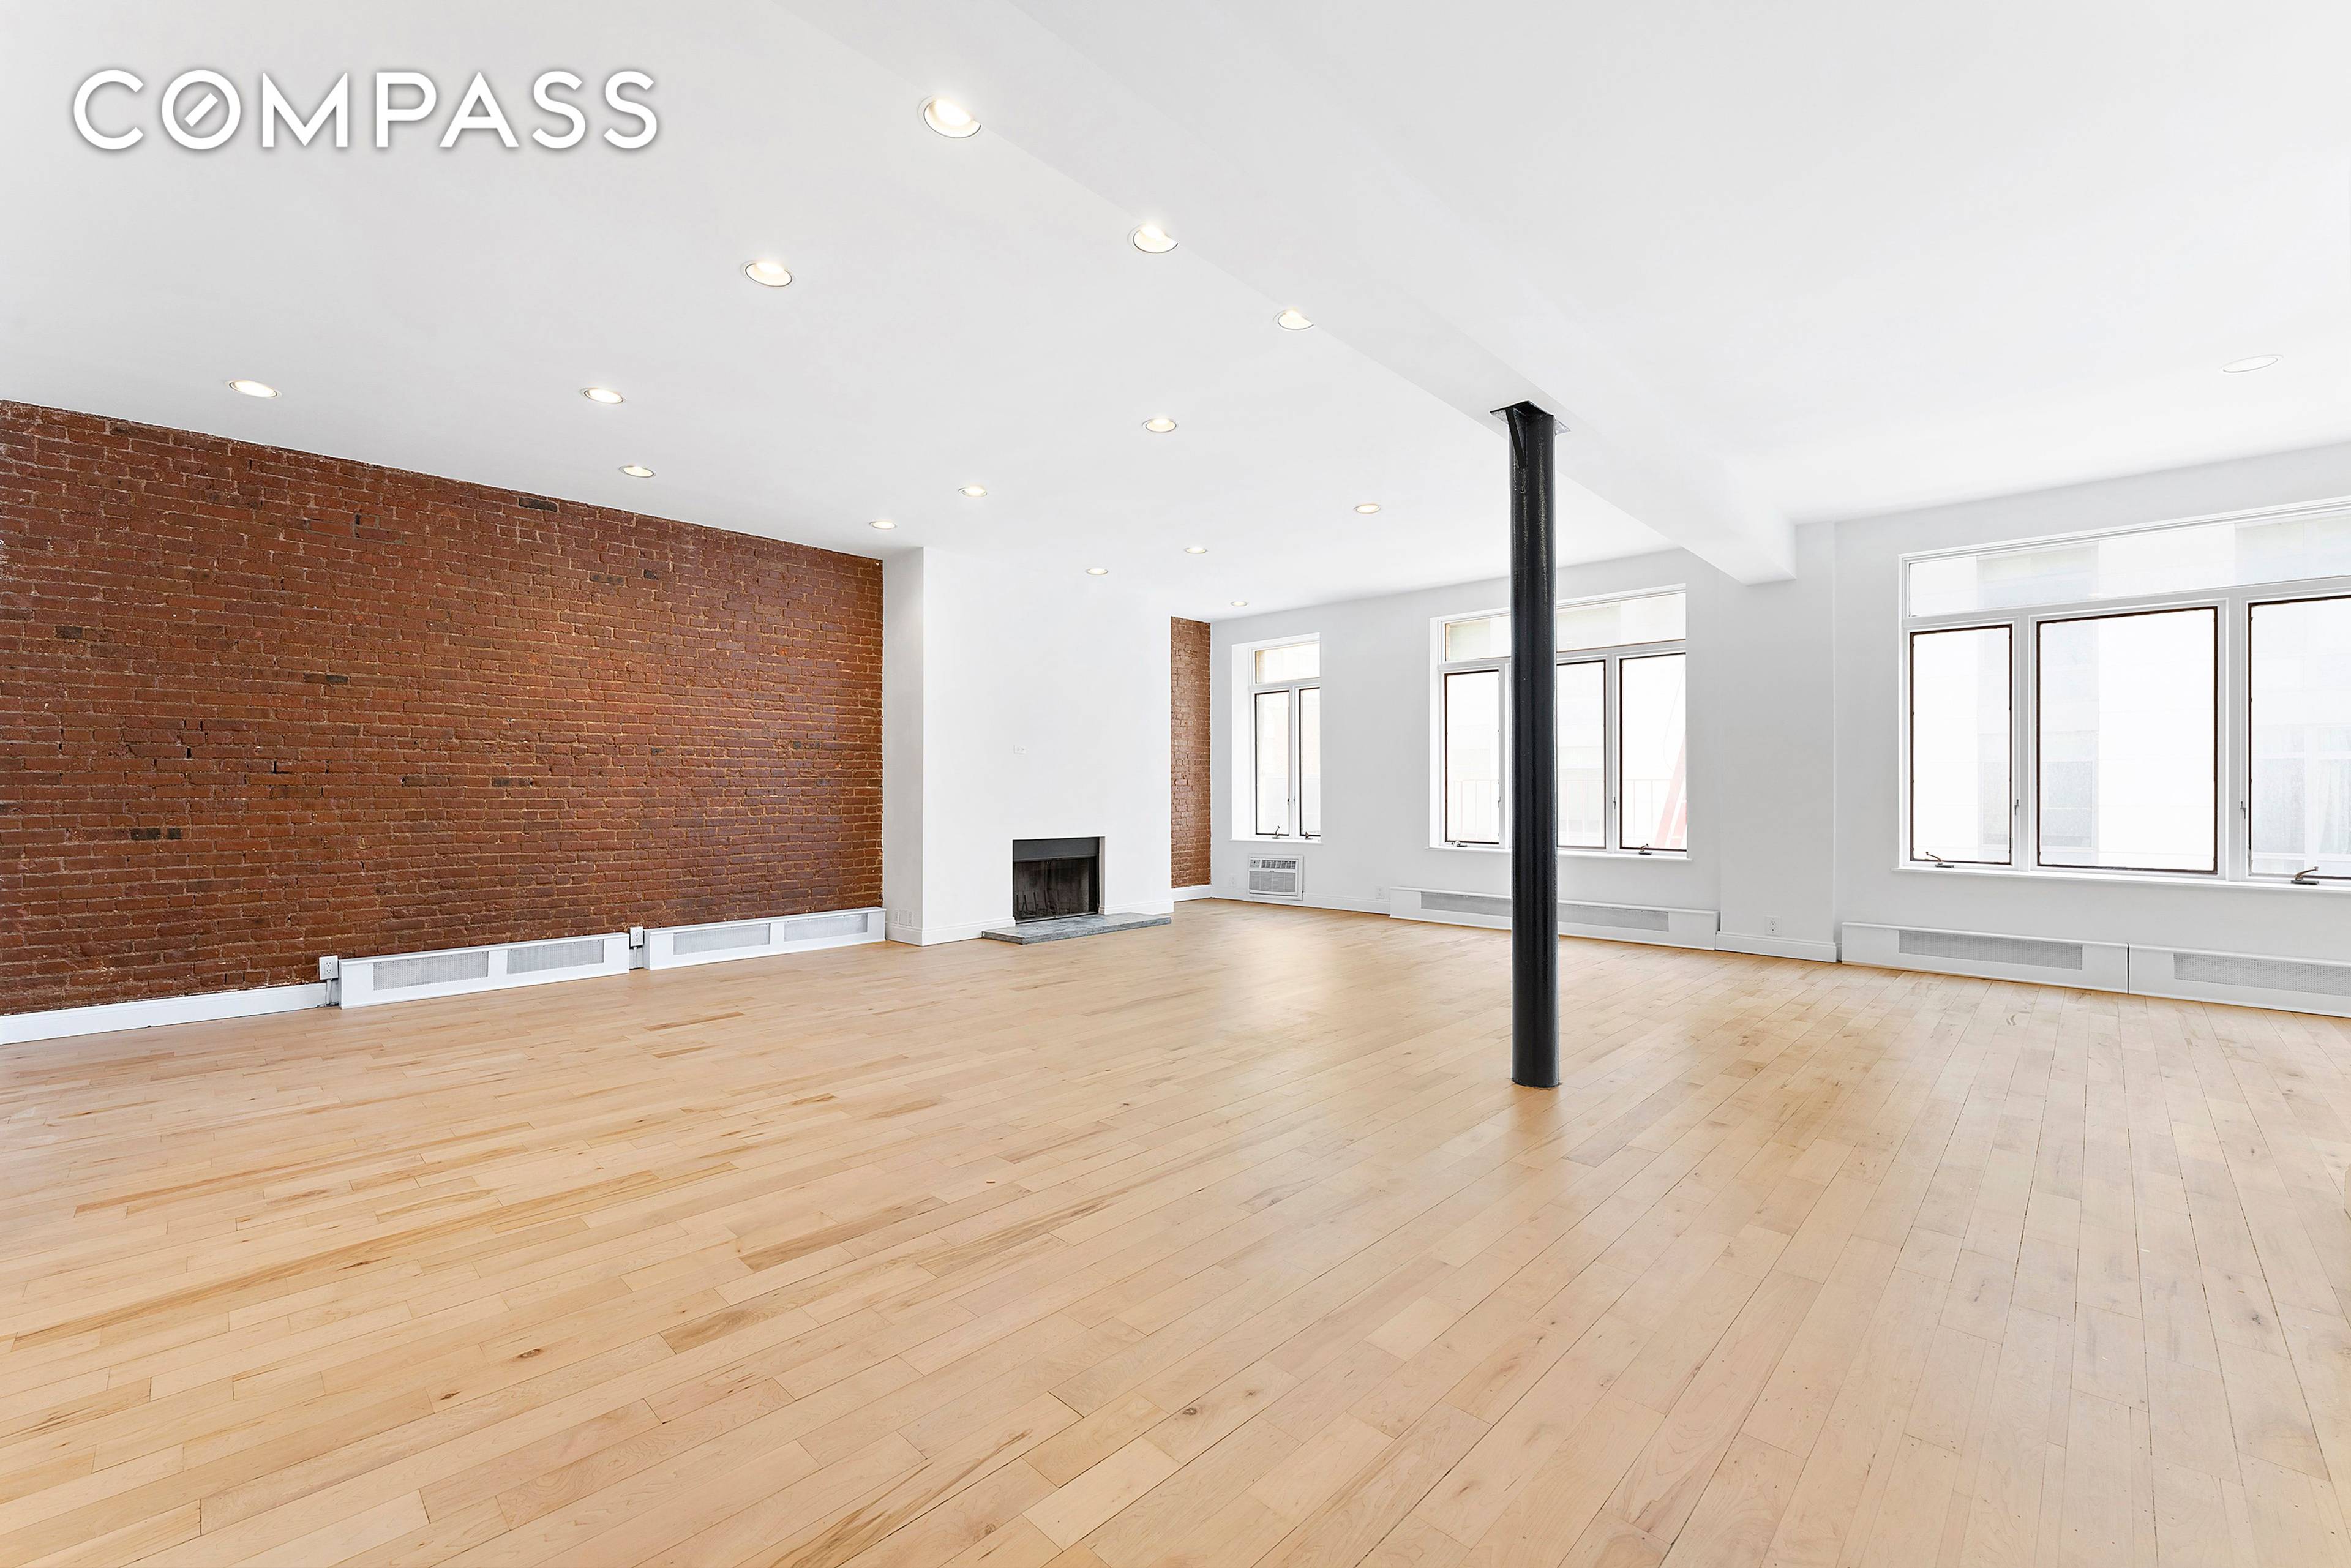 RECENTLY RENOVATED Rarely available 40 ft by 60 ft full floor loft in prime SoHo location, boasting 3 BD 2 BA, WBFP and private roof deck.